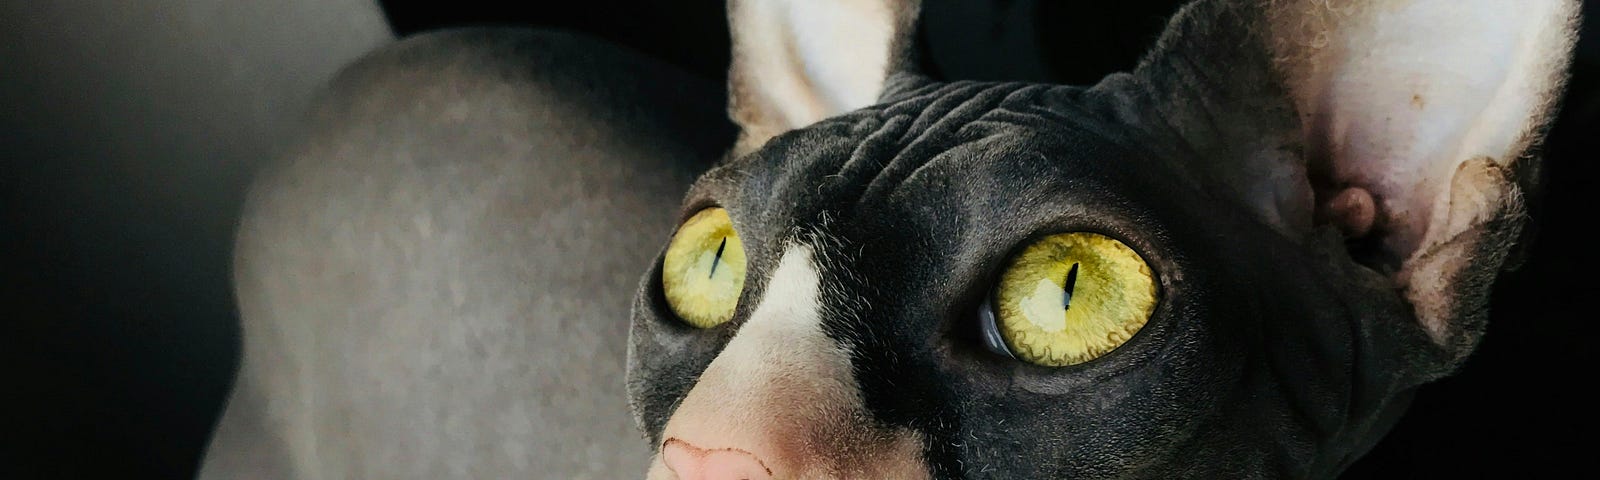 A hairless black and gray cat with large ears and lime-green eyes looks off to the left. Frankly scary.